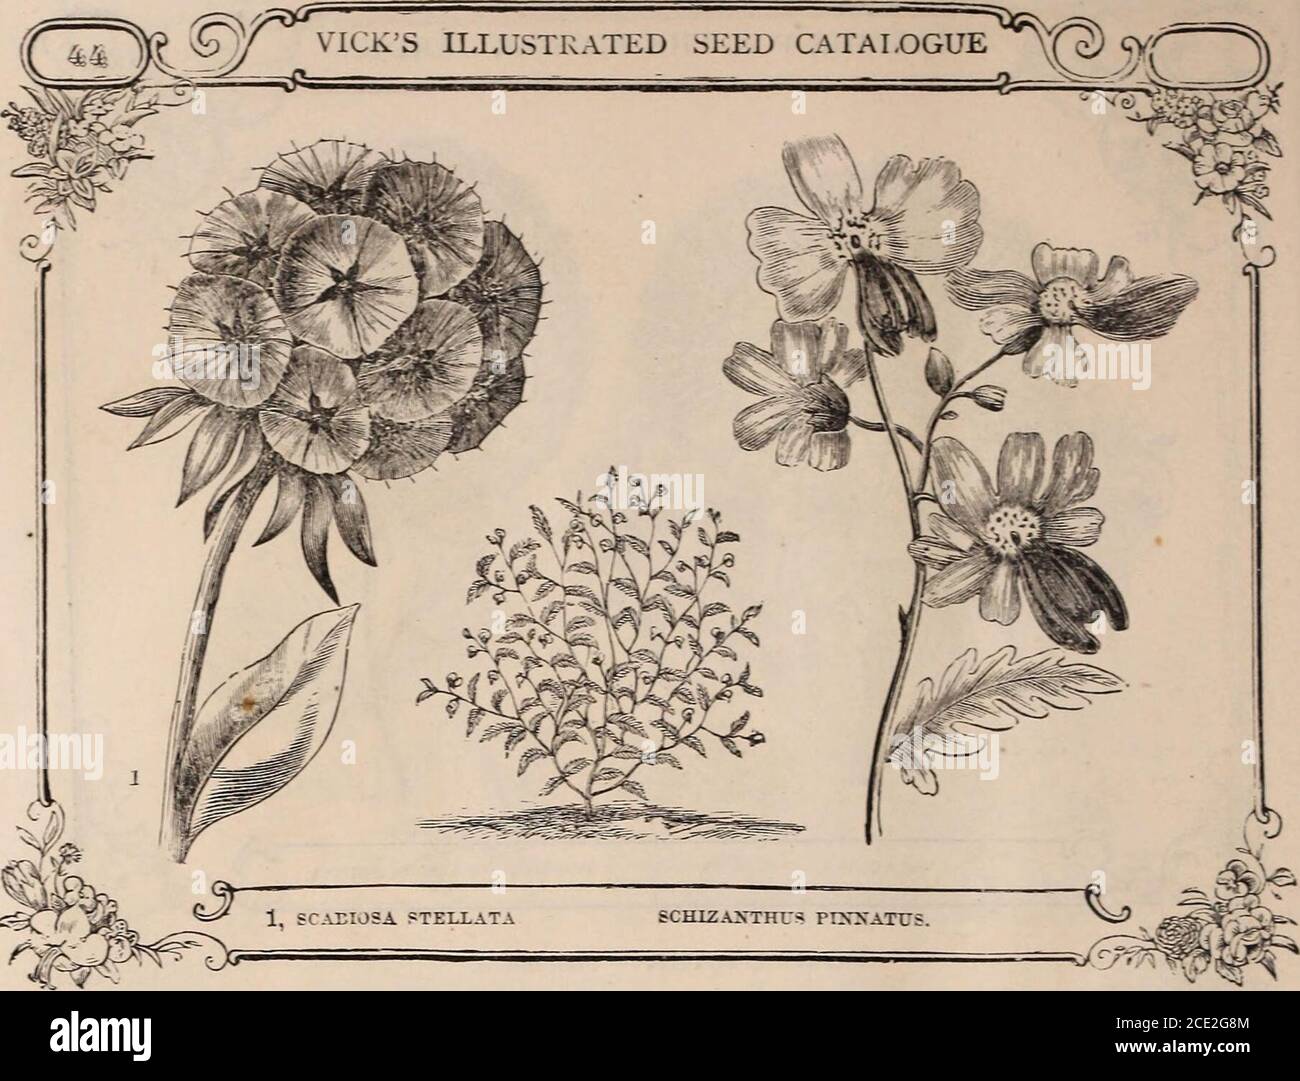 . Vick's illustrated catalogue and floral guide, 1871 . foliage, beautiful; 6 feet, 10 purpureus, purple, magnificent; 6 feet, 10 Borboniensis, beautiful; splendid large leaves; 15 feet, 10 sanguineus, blood red stalks, scarlet fruit; one of the best; 5 feet, 5 Africanus hybridus, new and fine; stalk and fruit rose; 6 feet, 10 giganteus, new ; very large, fine and showy; 6 feet, 10 New species from the Philippines; gigantic leaves; 6 to 10 feet, 15 nanus microcarpus, dwarf, only 2 to 3 feet in height; fine for the outside of groups, 15 communis, (Palnia Christi,) common Castor Oil Bean, 5 SALP Stock Photo